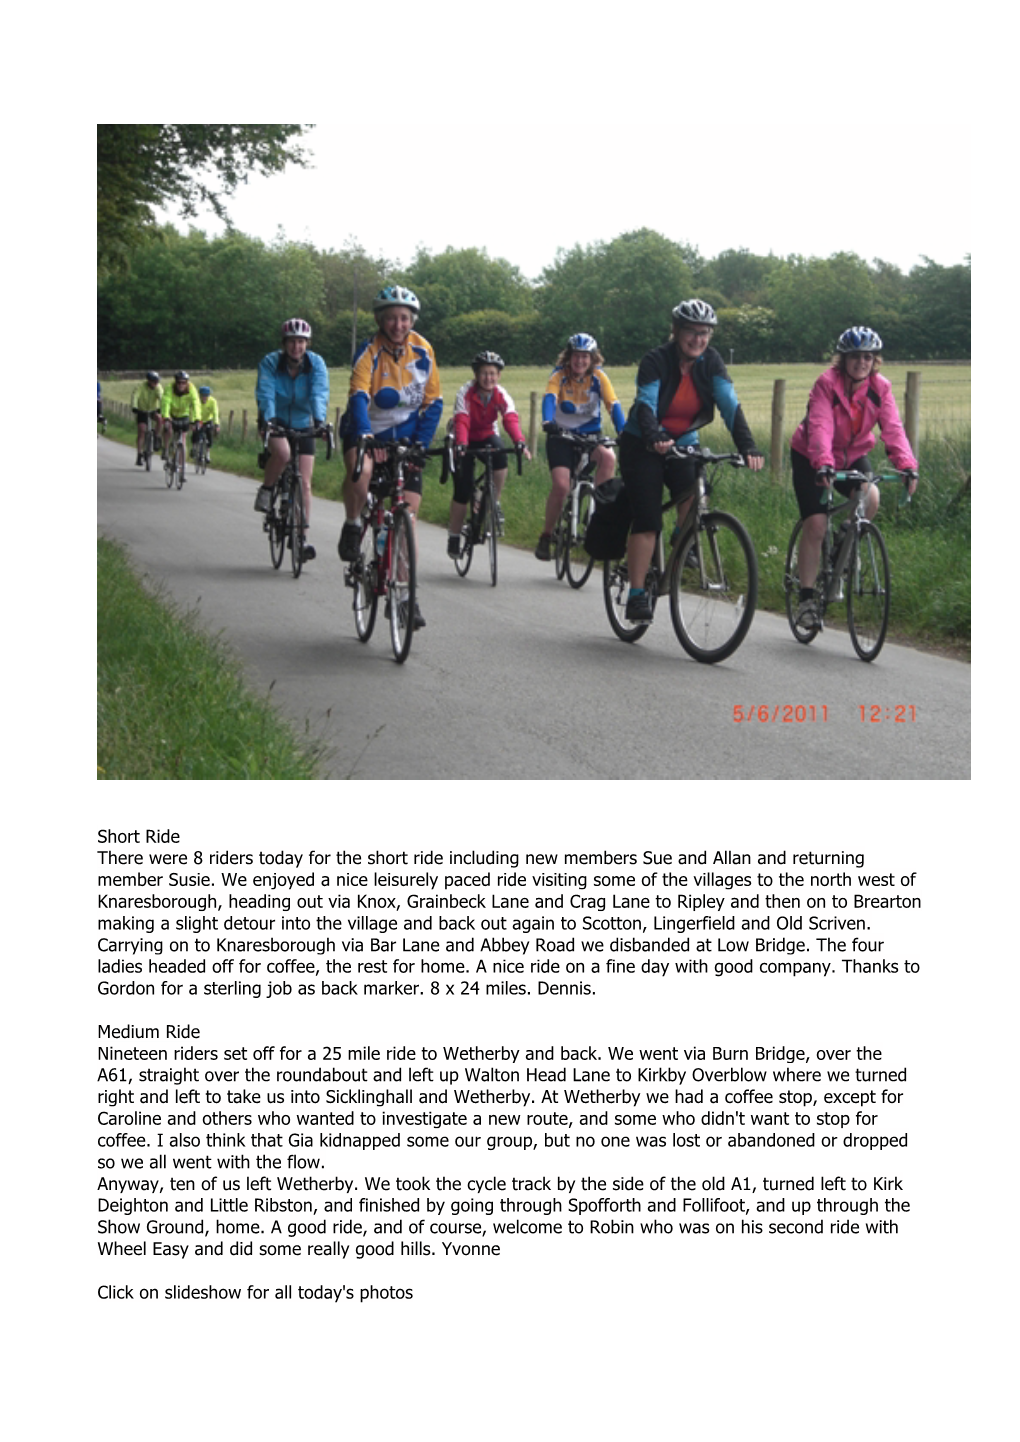 Short Ride There Were 8 Riders Today for the Short Ride Including New Members Sue and Allan and Returning Member Susie